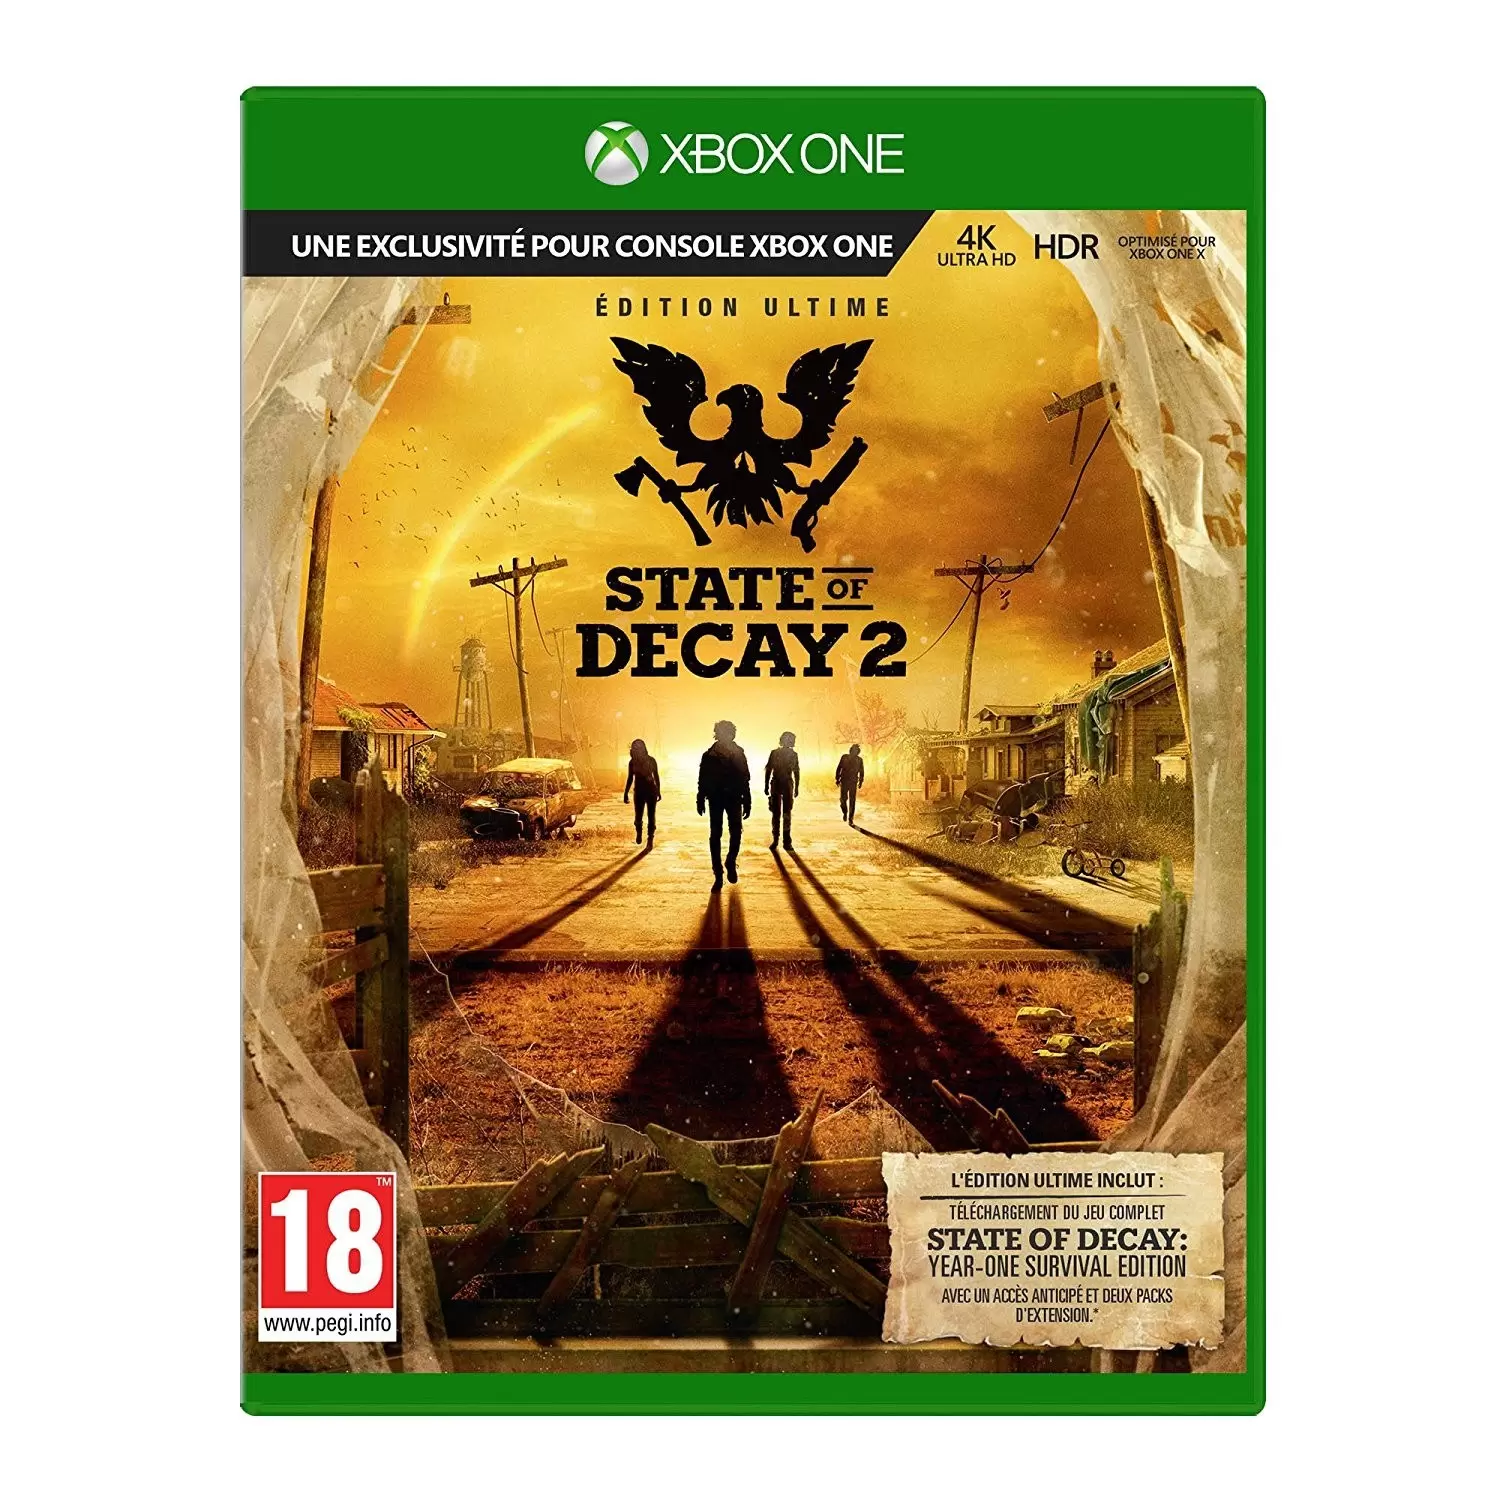 XBOX One Games - State of Decay 2 Ultimate Edition